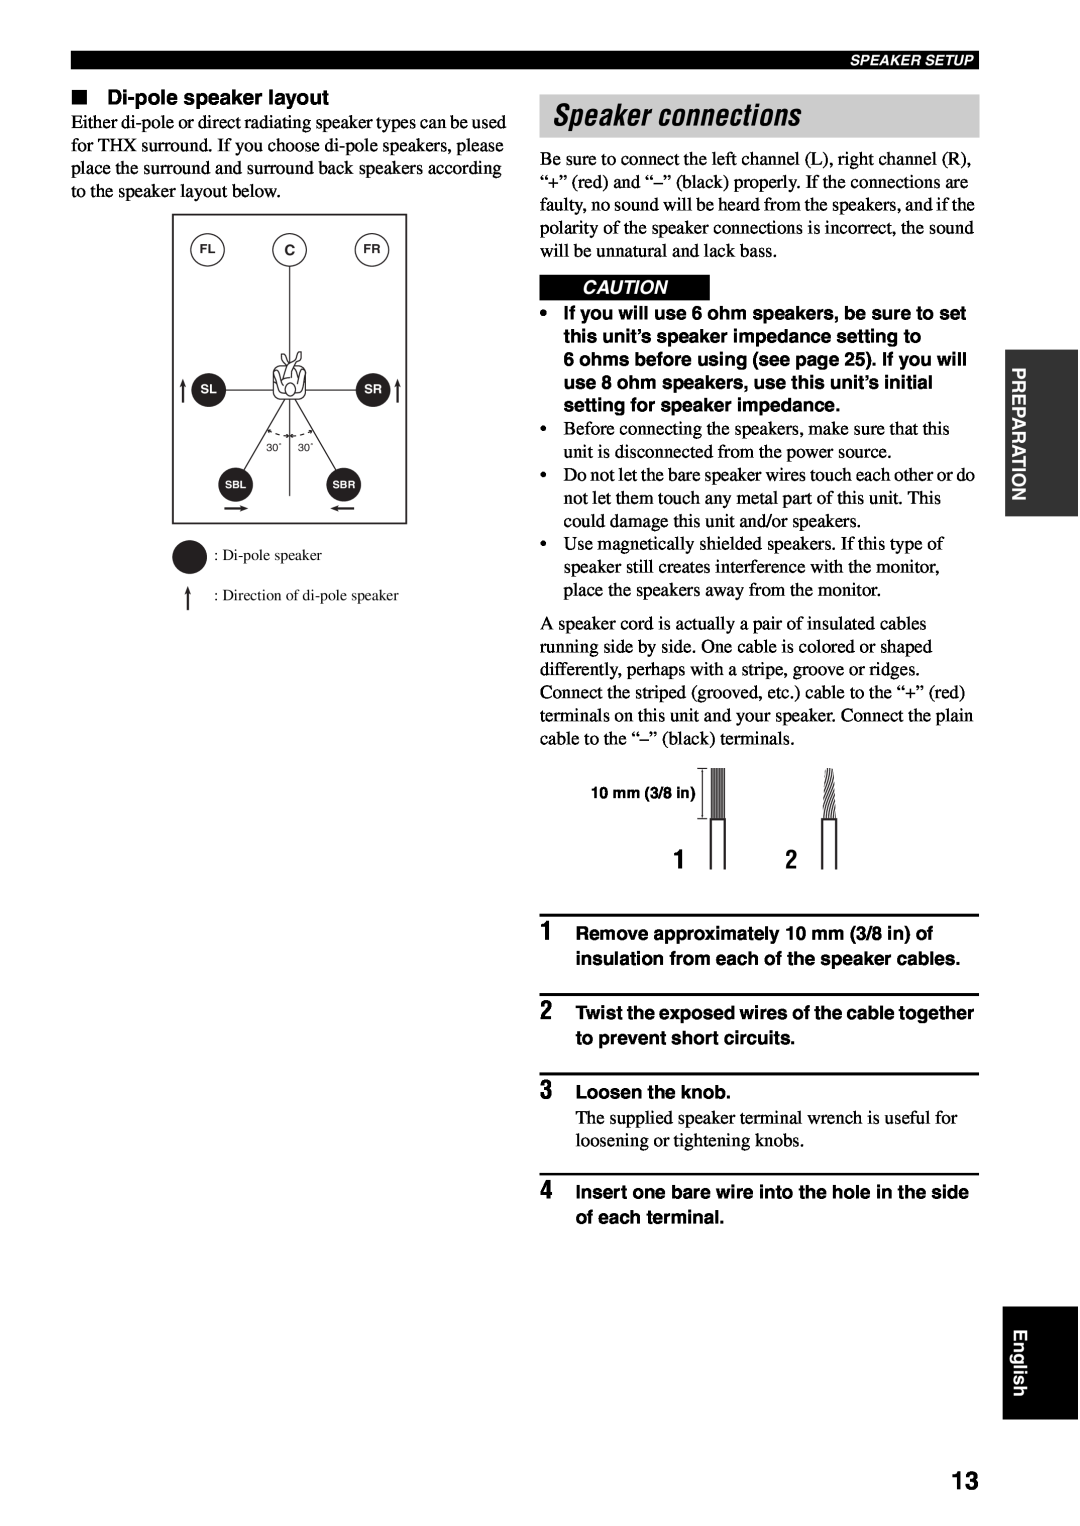 Yamaha RX-V2500 owner manual Speaker connections, Di-polespeaker layout, 3Loosen the knob 